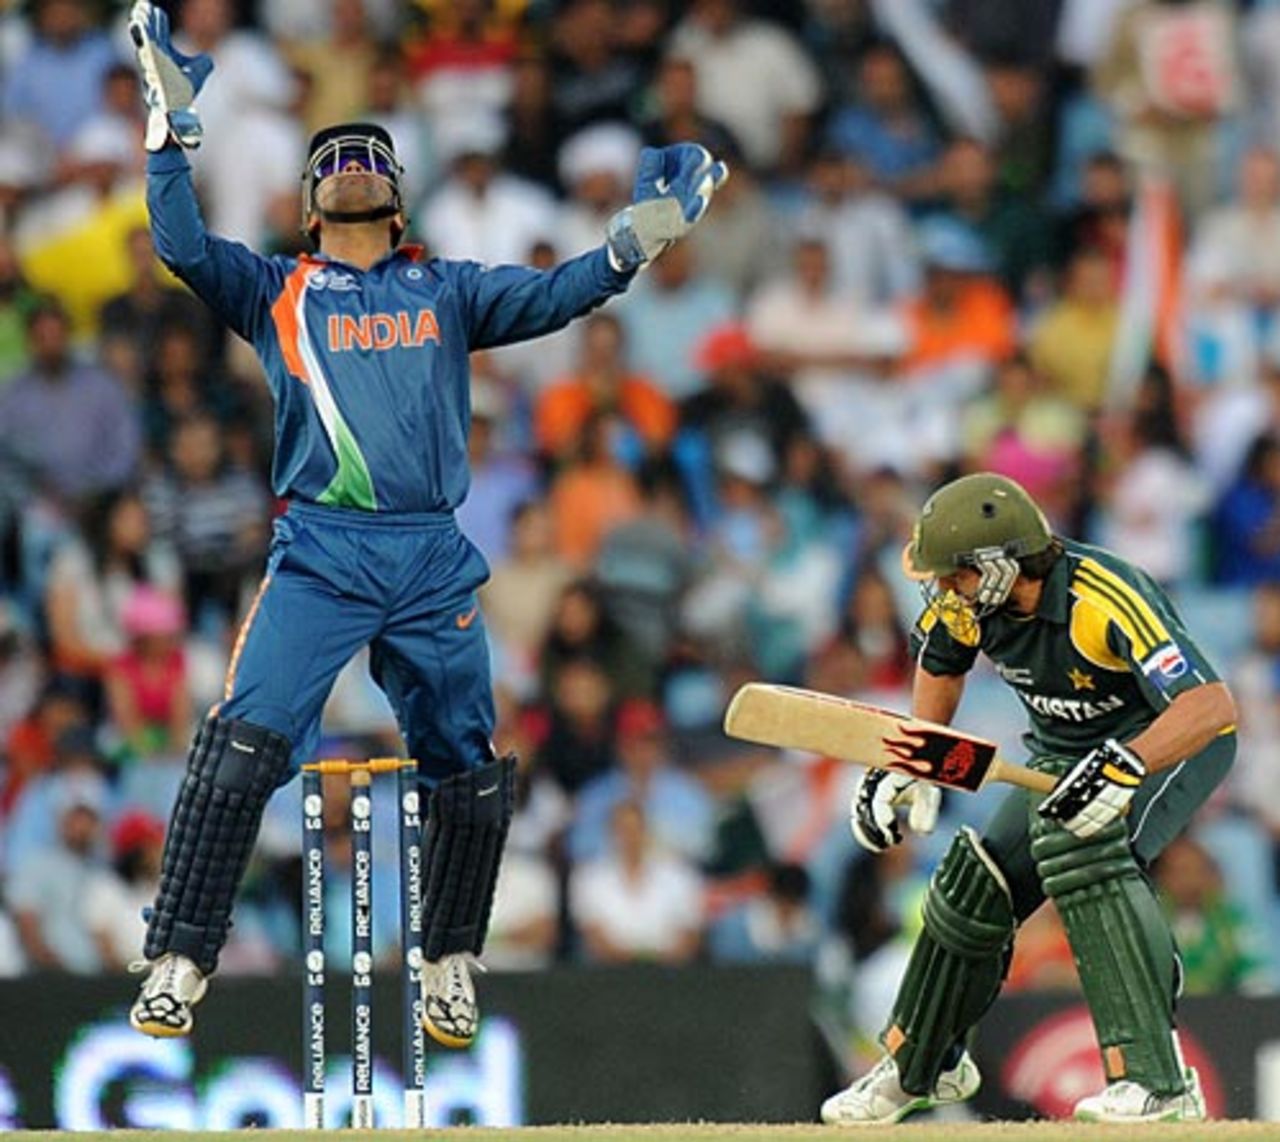 Shahid Afridi was caught behind off his second ball, India v Pakistan, Champions Trophy, Group A, Centurion, September 26, 2009